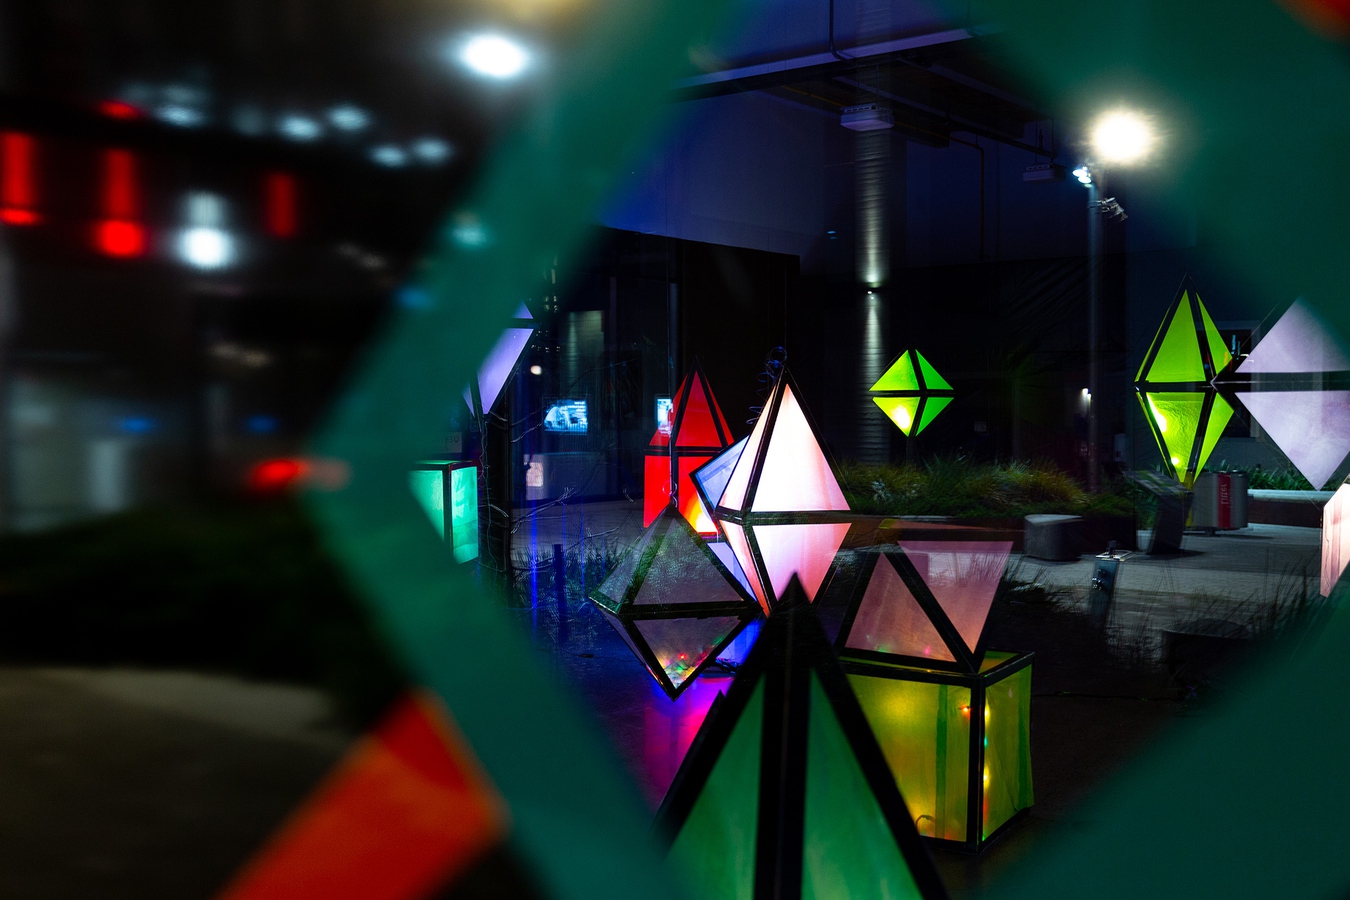 Light it up! (installation view), a collaborative initiative between Hagley College and The Physics Room developed for Christchurch City Council's ShoPOP Enliven Spaces Programme.